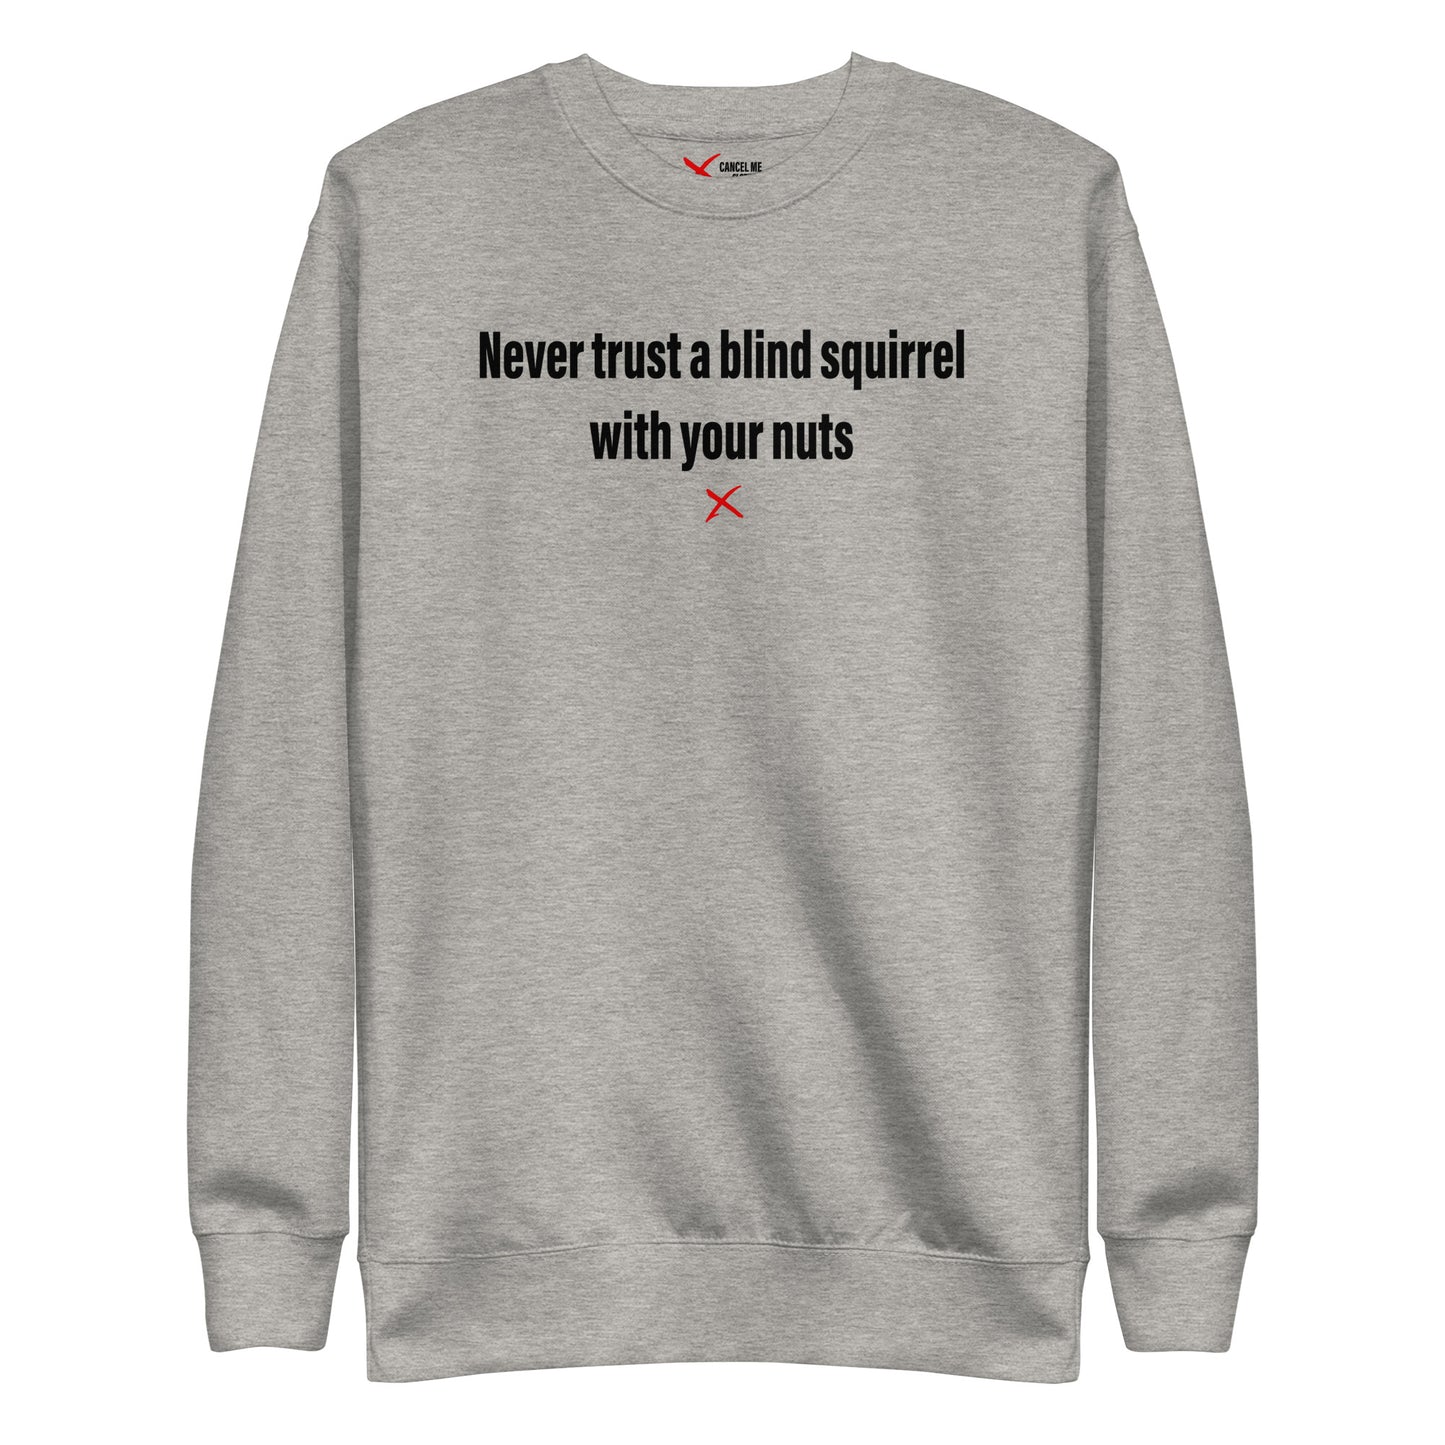 Never trust a blind squirrel with your nuts - Sweatshirt